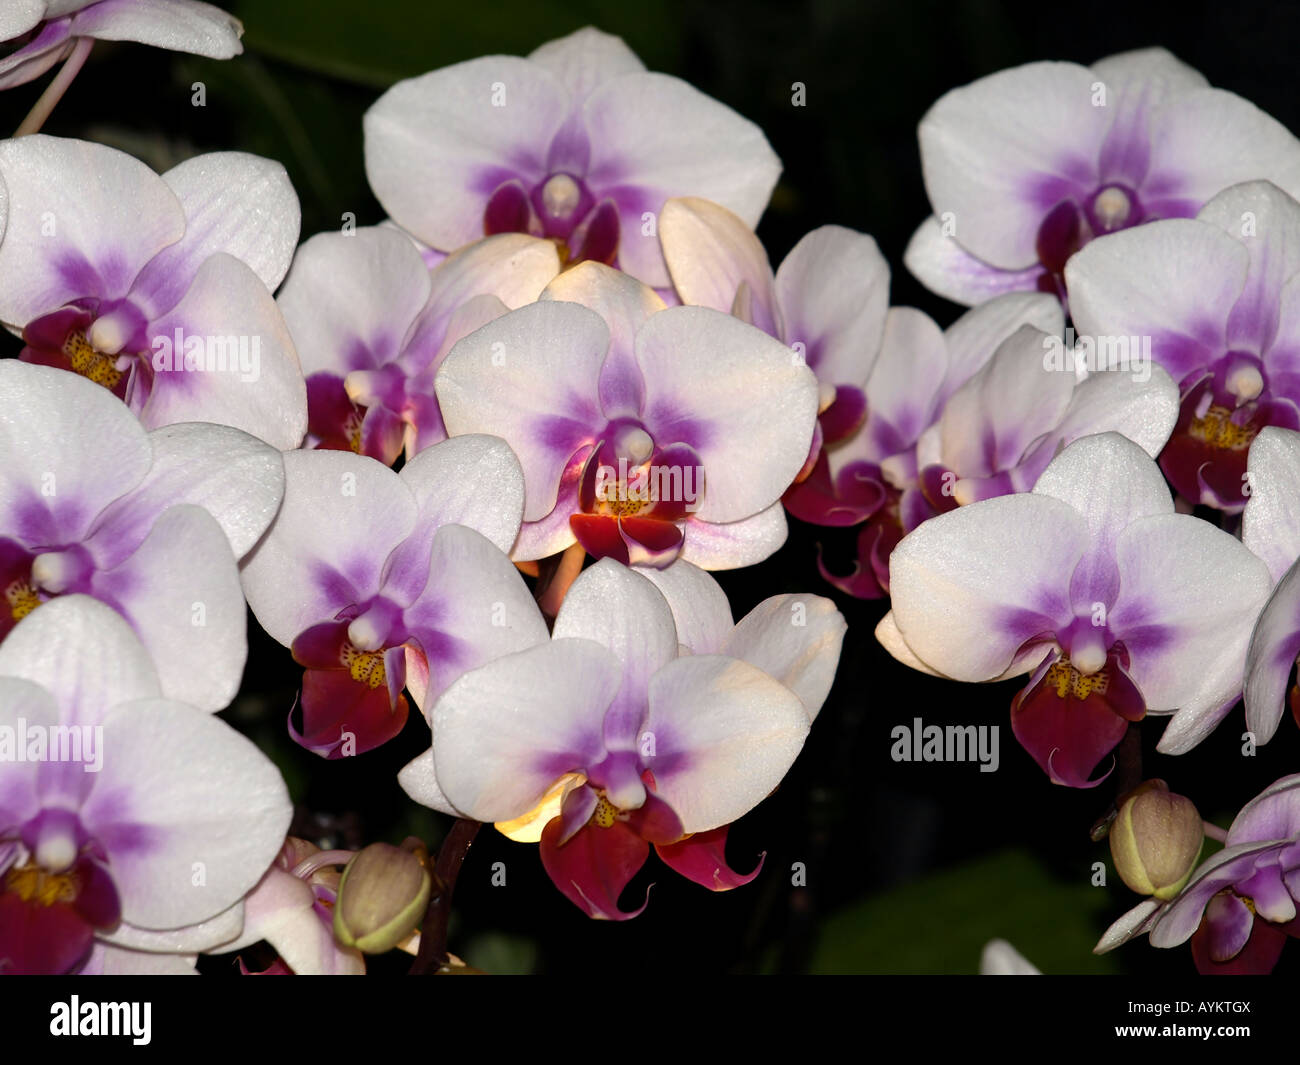 white red centre orchid flowers Stock Photo